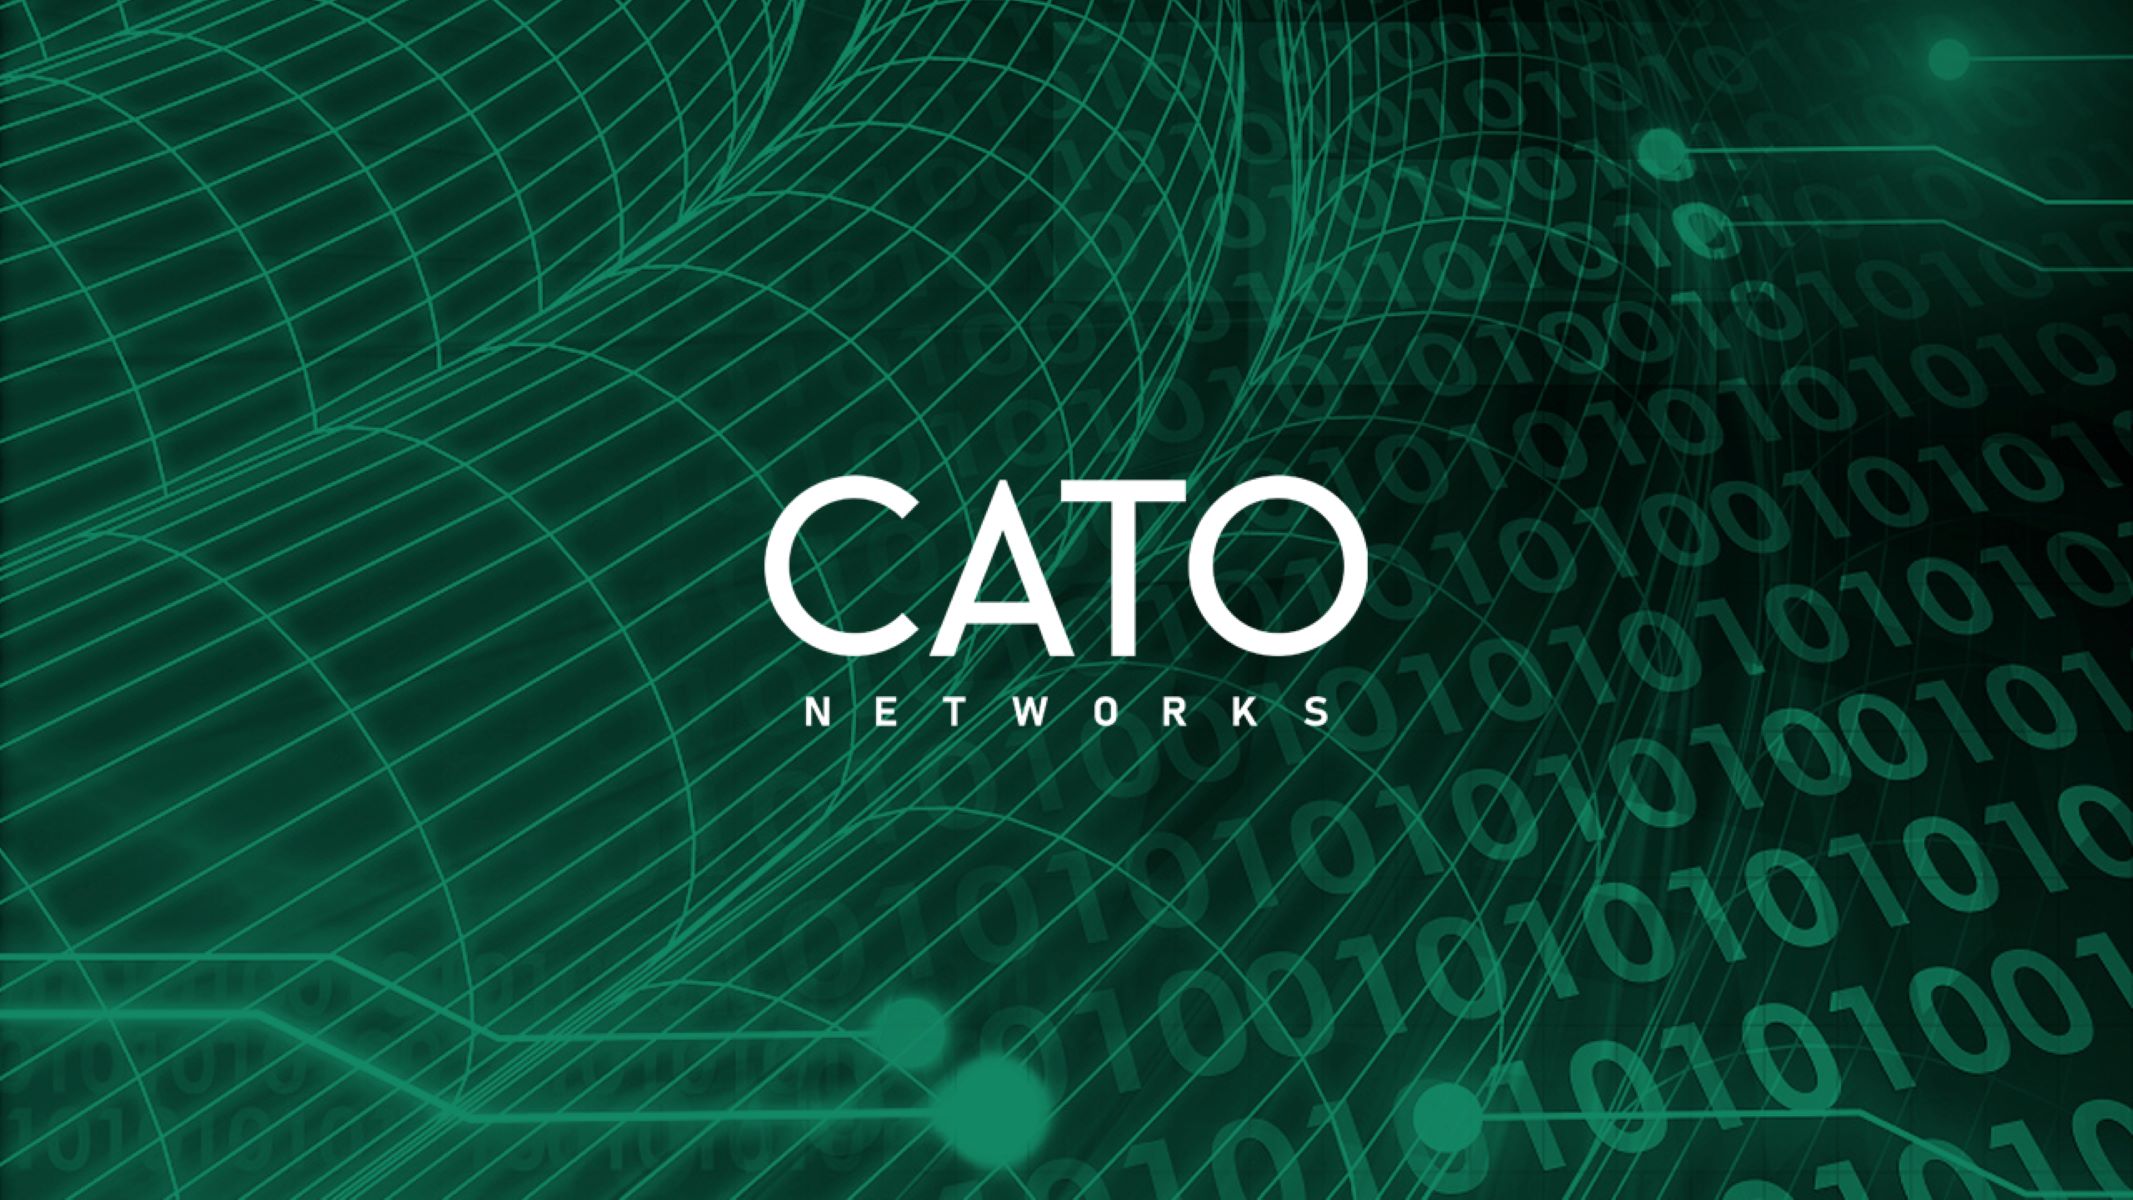 new-offering-from-cato-networks-secures-238m-in-funding-ahead-of-ipo